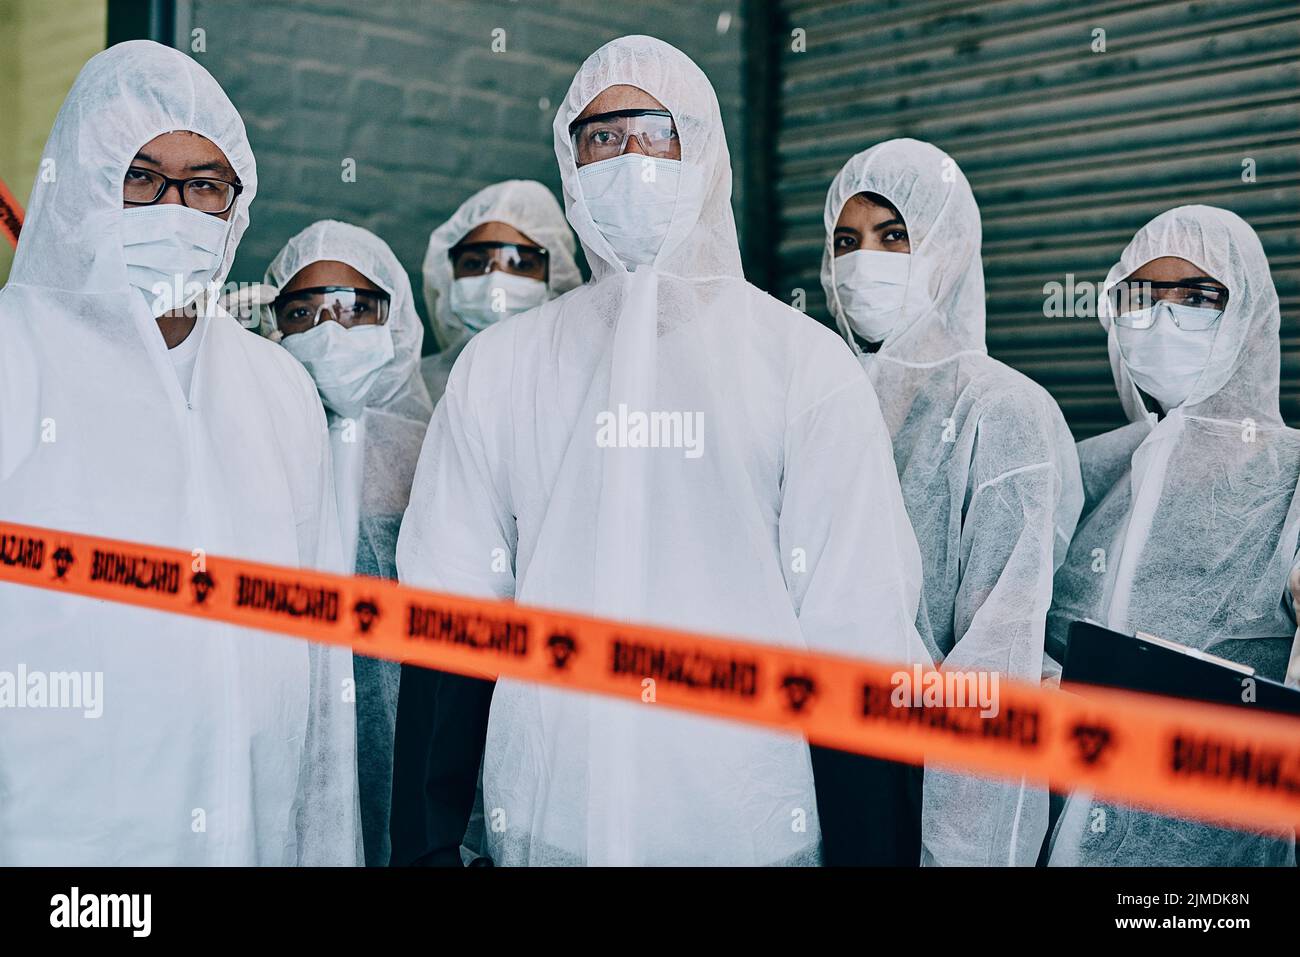 Covid, pandemic and team doctors, scientists or heathcare workers wearing protective ppe to prevent virus spread at a quarantine site. First Stock Photo